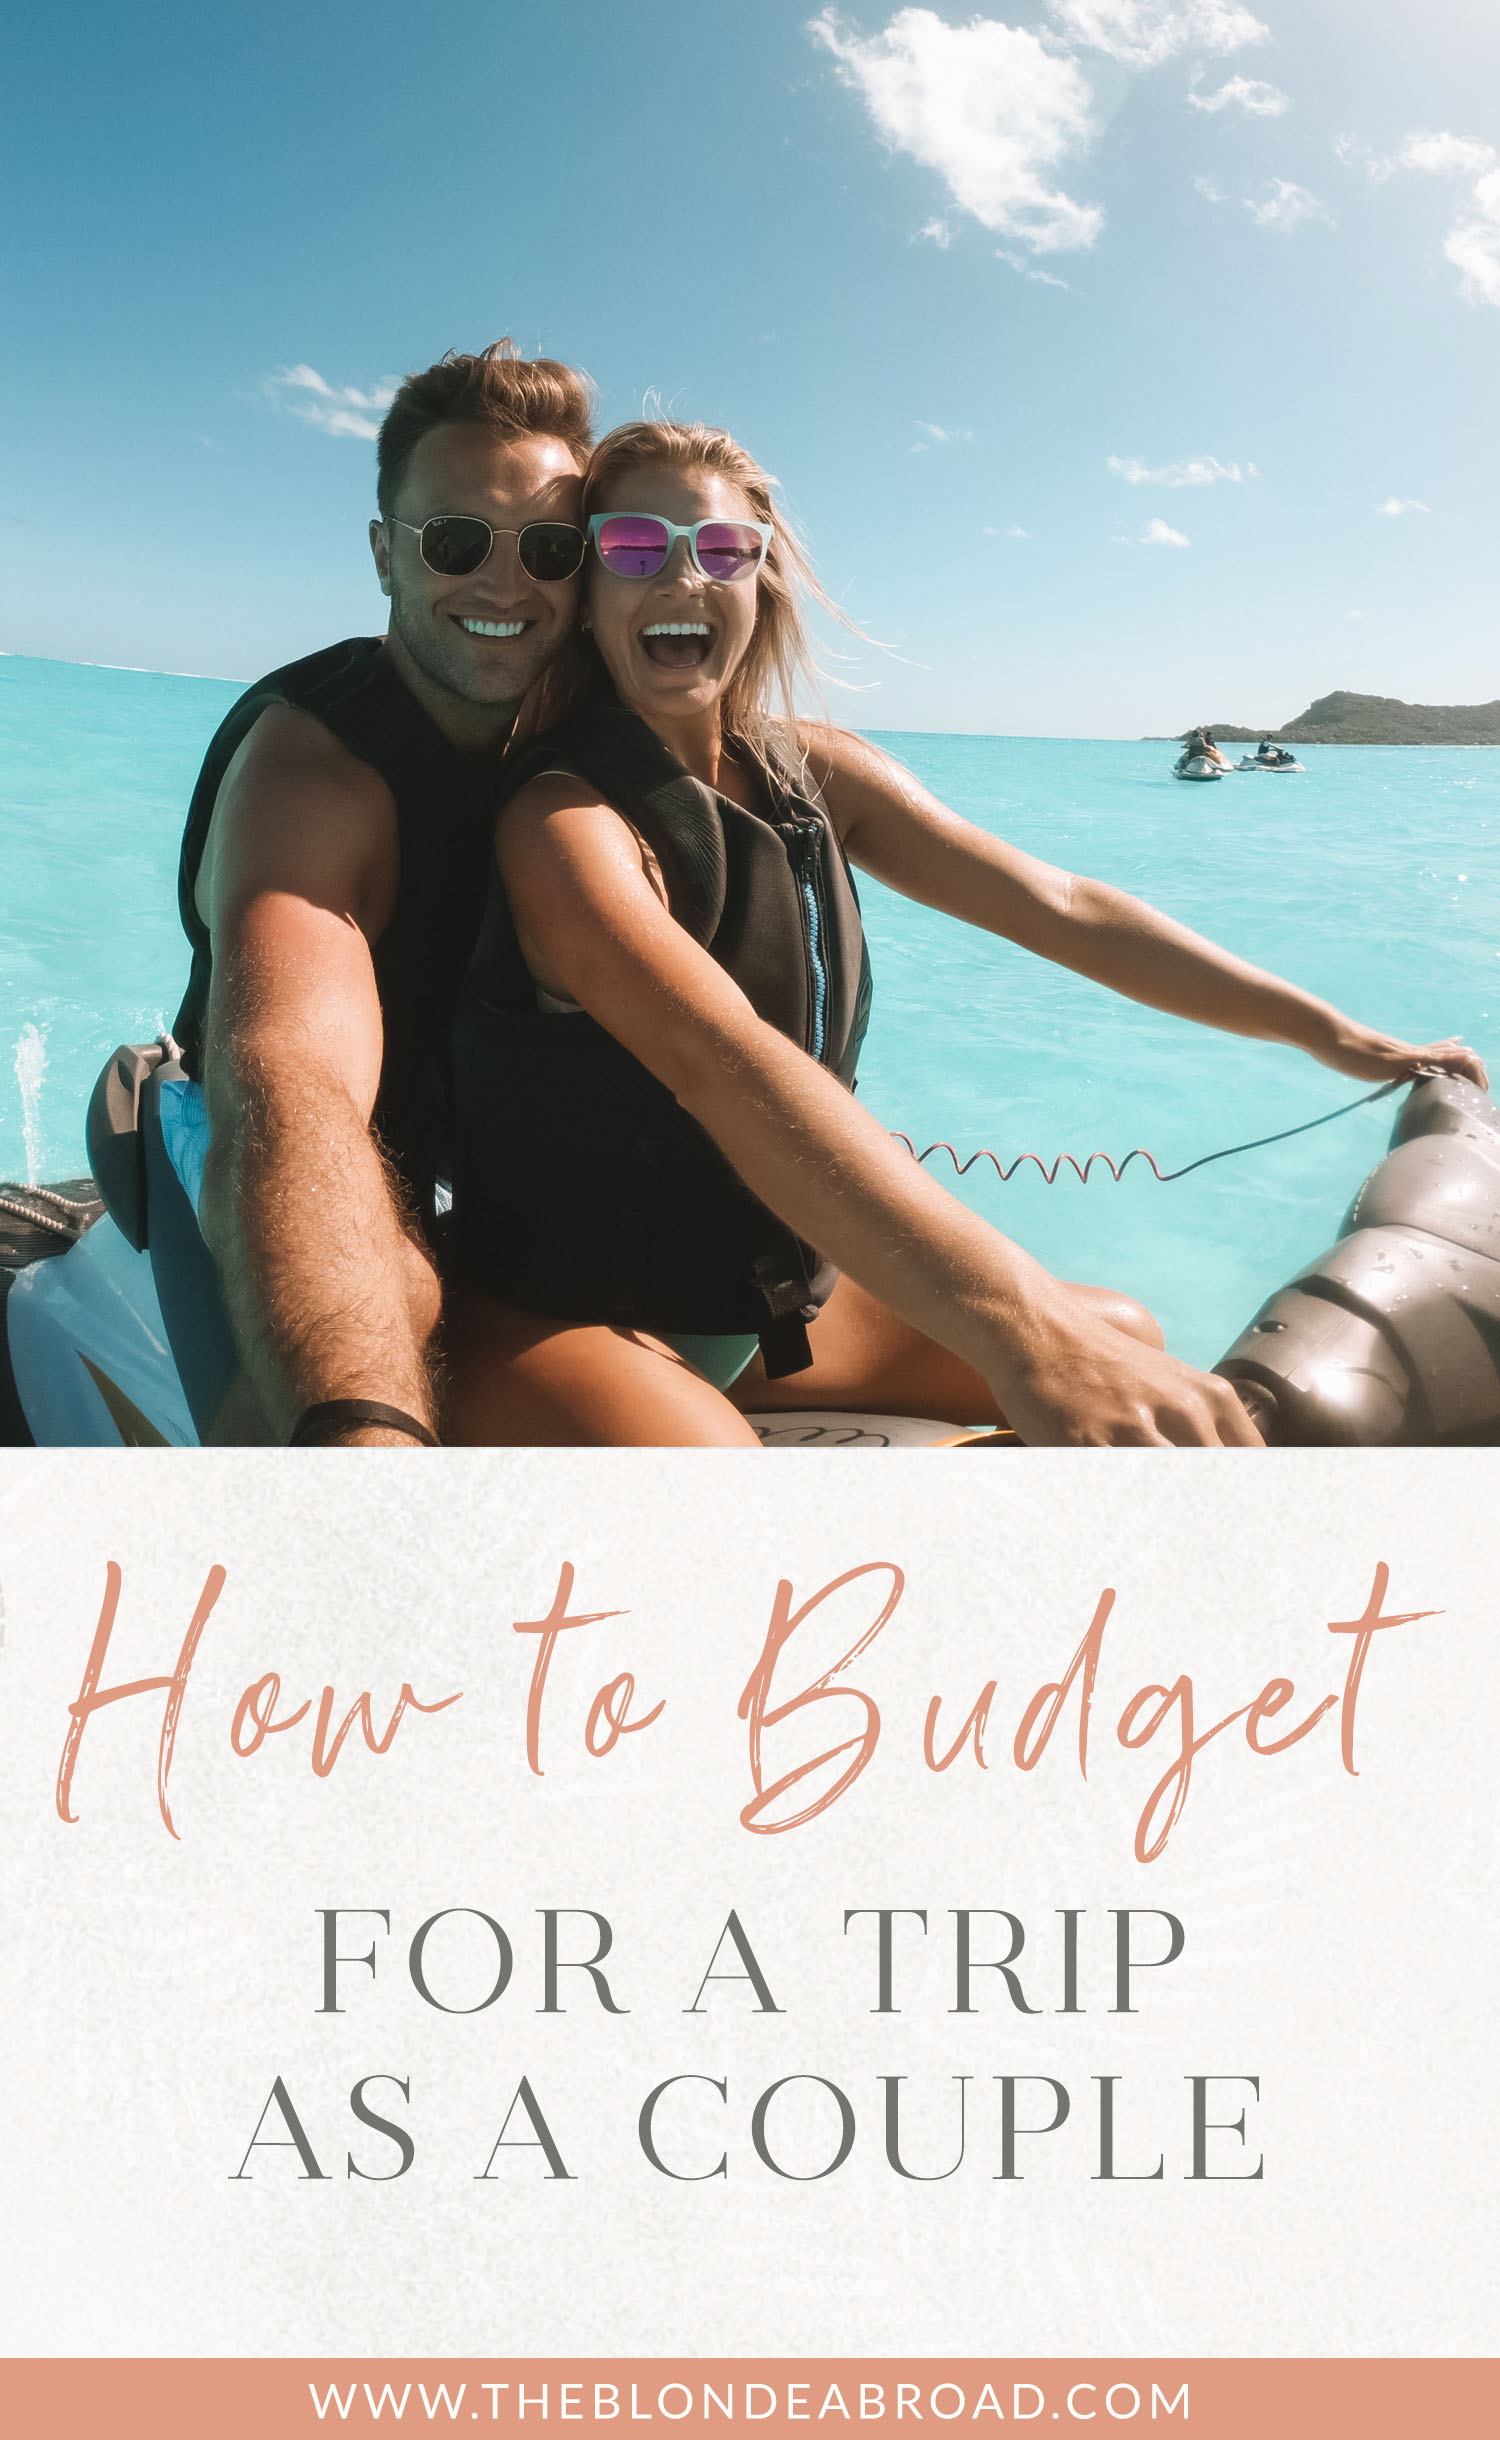 How to Budget for a Trip as a Couple